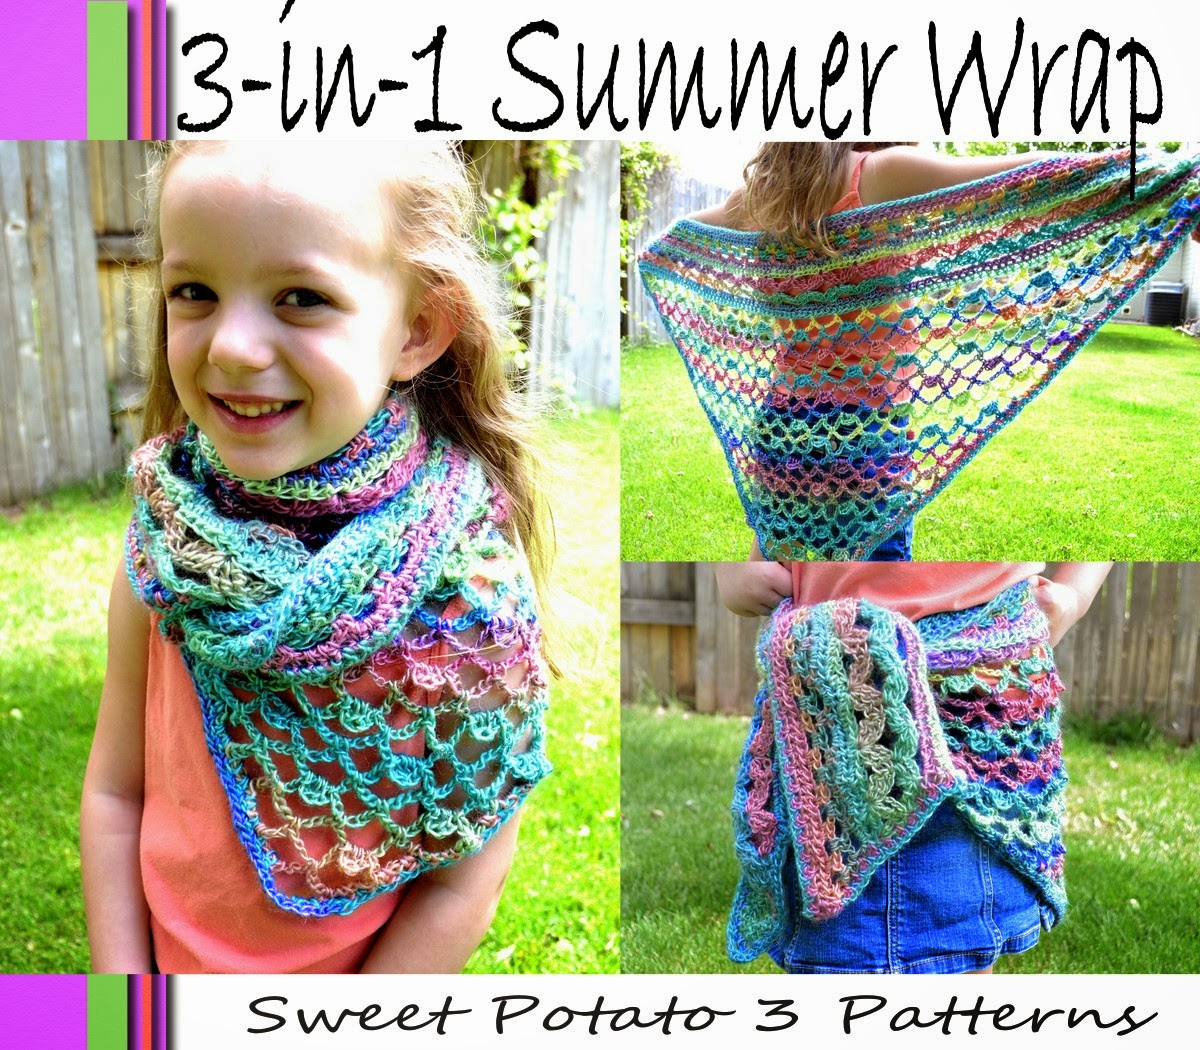 You are currently viewing 3-in-1 Summer Wrap Crochet Pattern